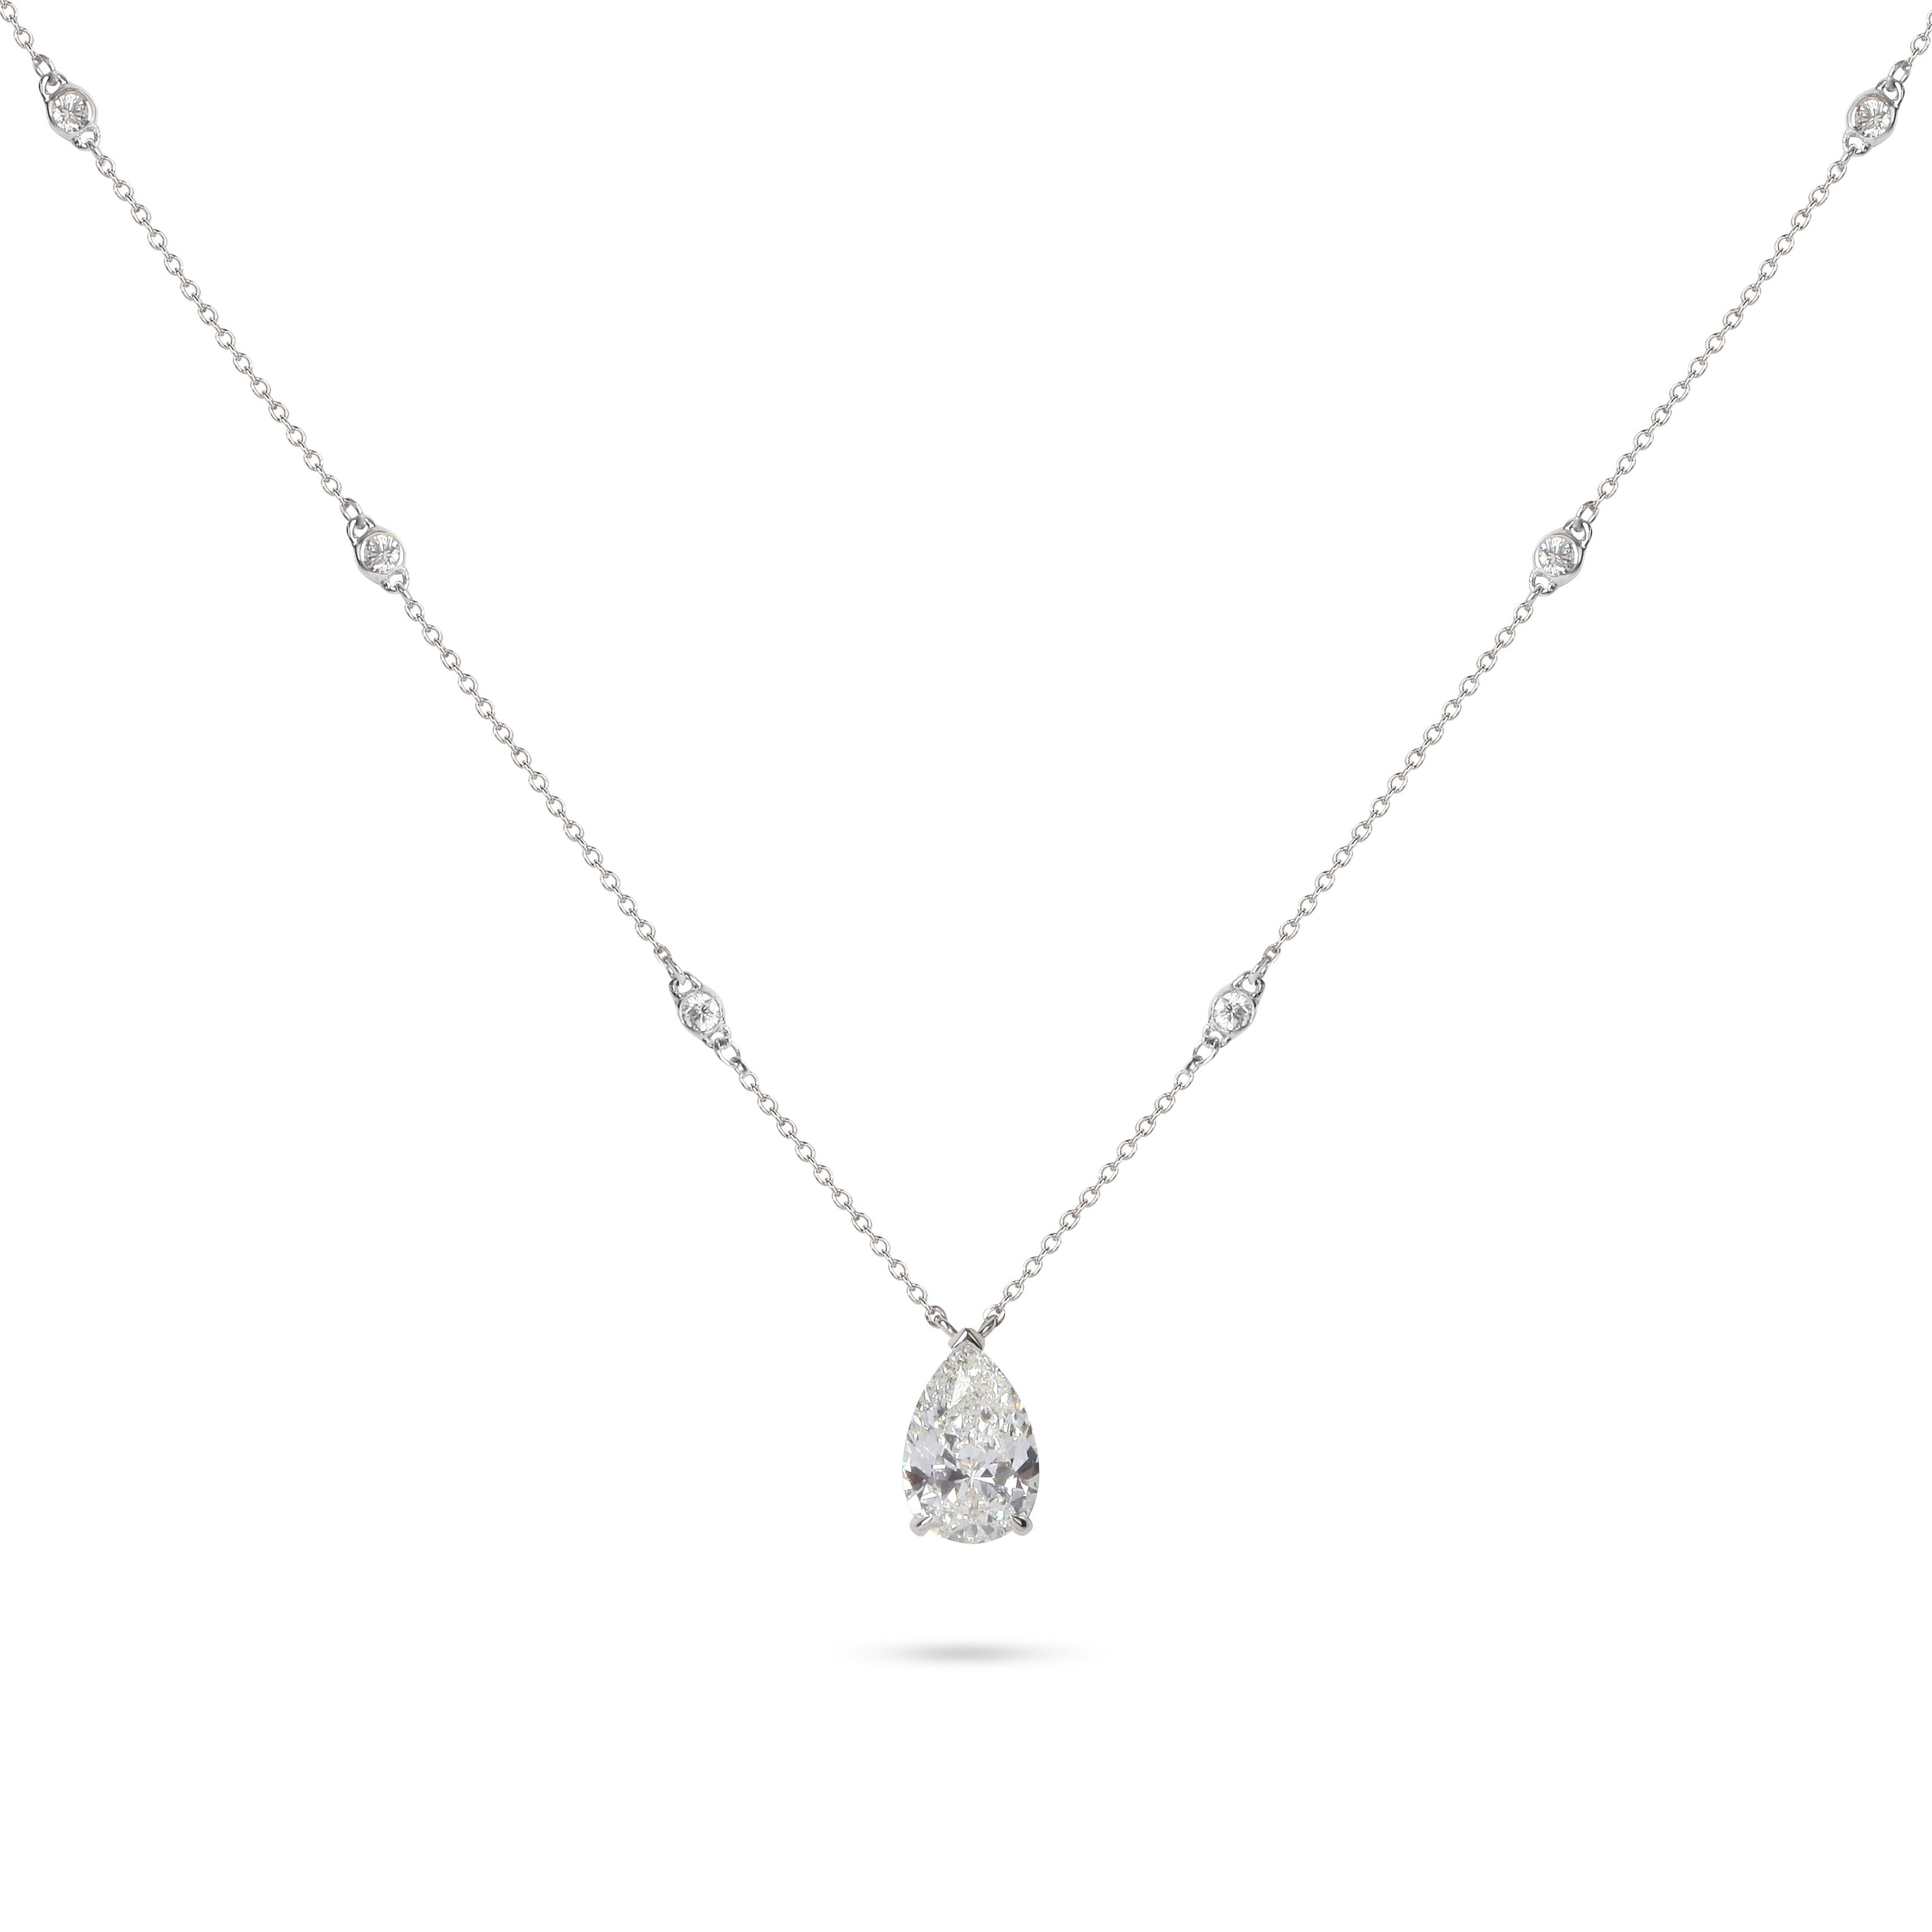 HRD Certified Solitaire Diamond Pendant Necklace | Diamond Necklace | Best Jewellery Stores